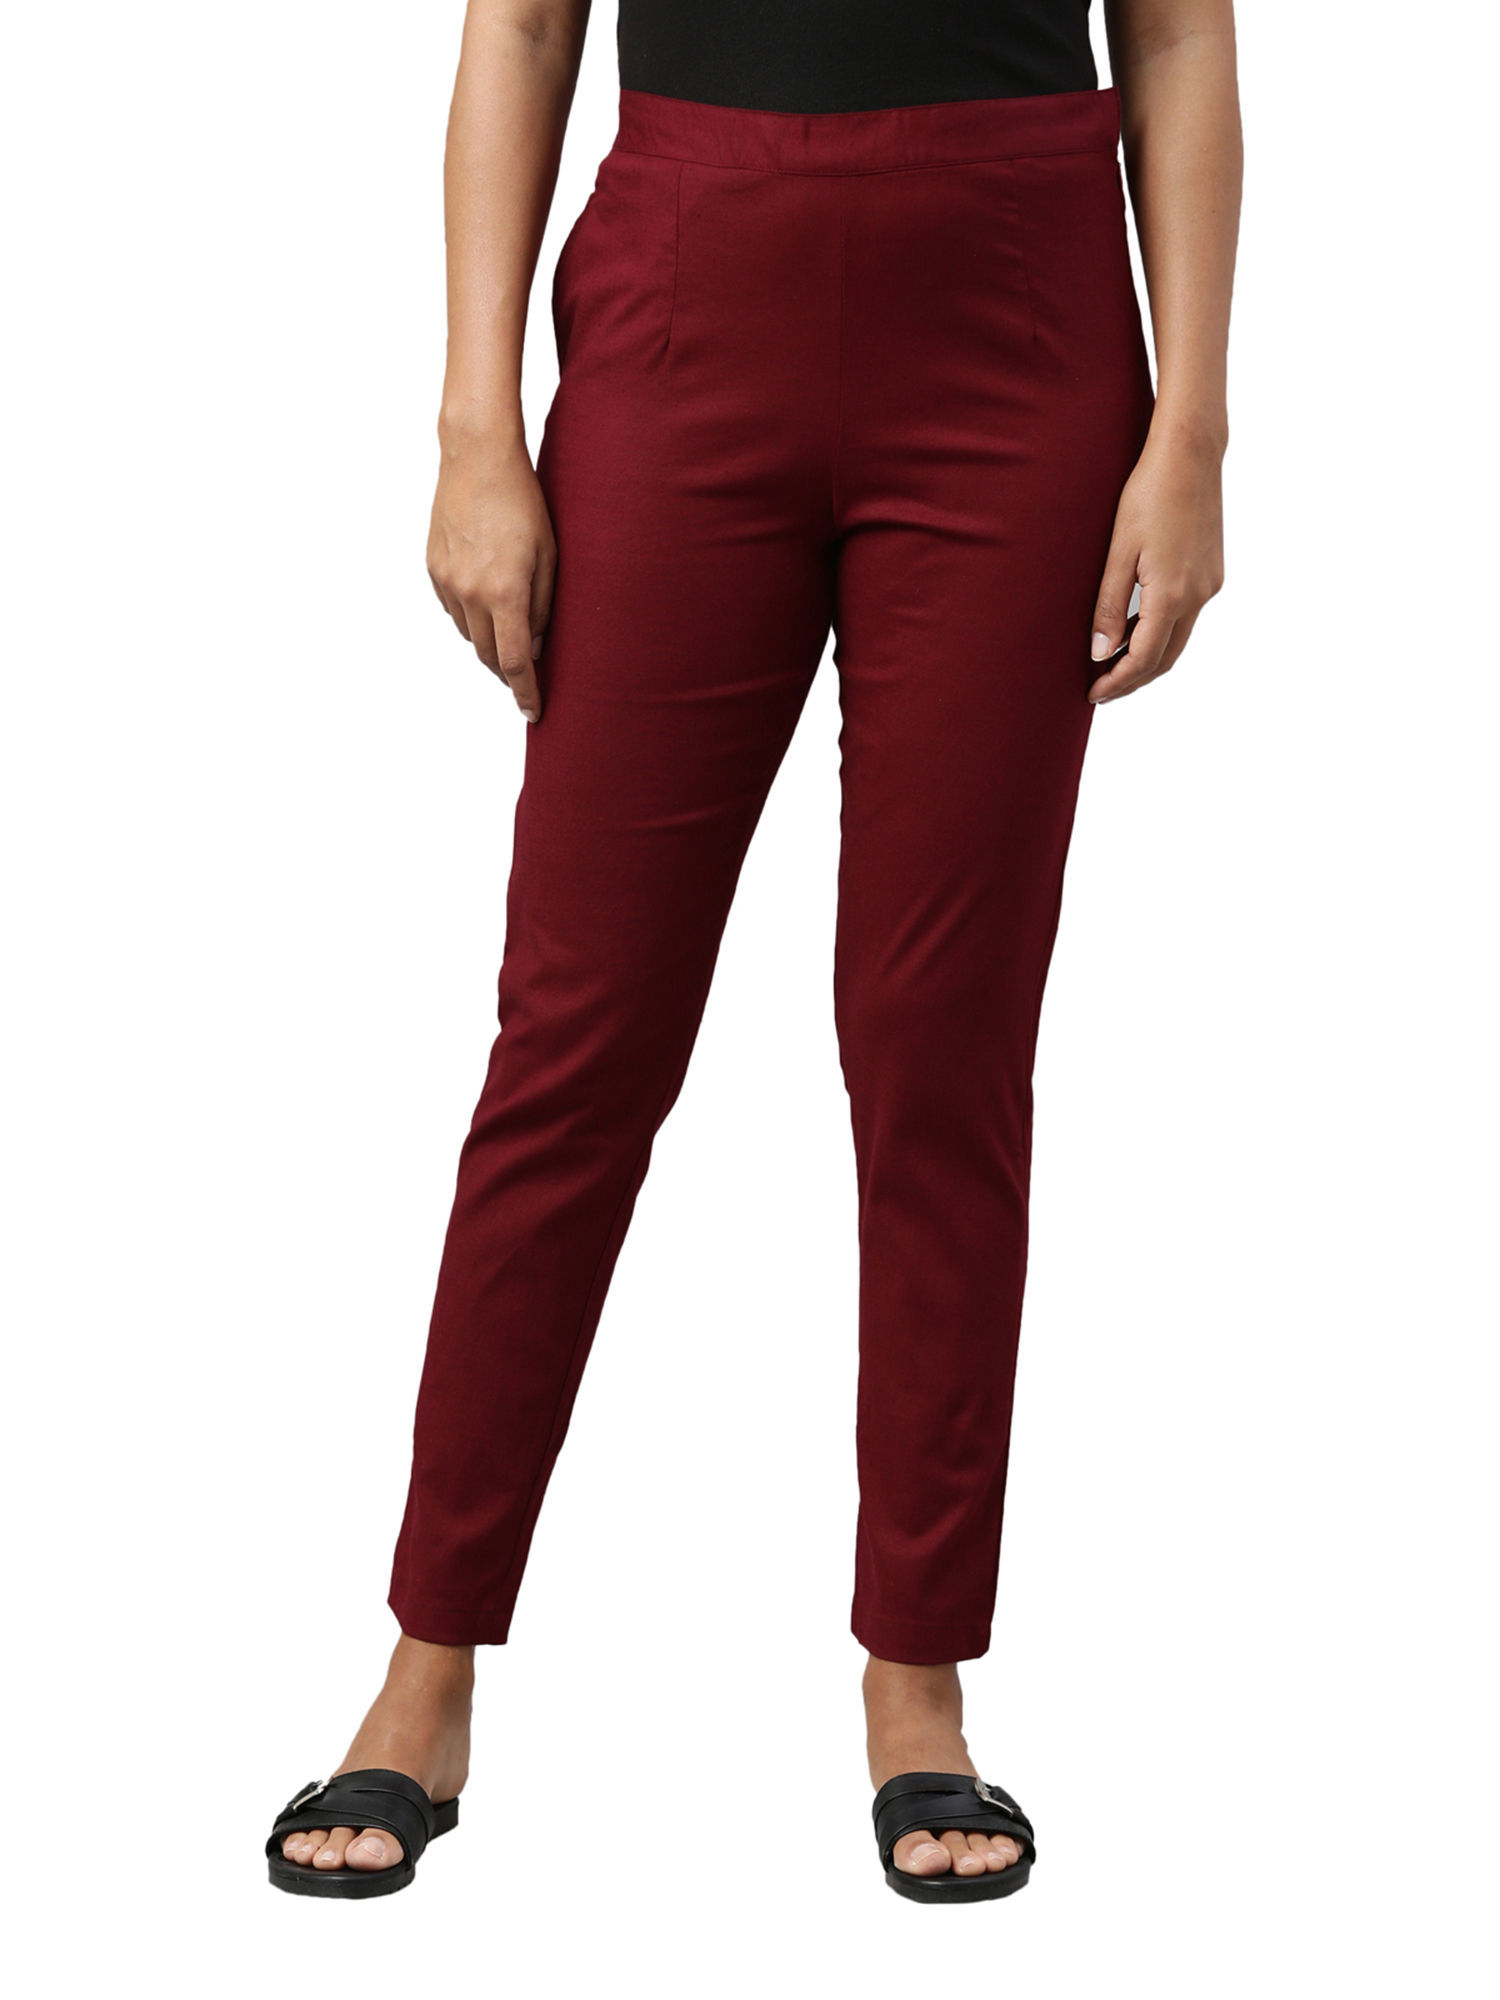 Buy DIGITAL SHOPEE Cotton Women Trouser Pant Use for Formal Office High  Waist for Wide Leg Ankle Length Straight Pencil Pant BeigeMedium at  Amazonin